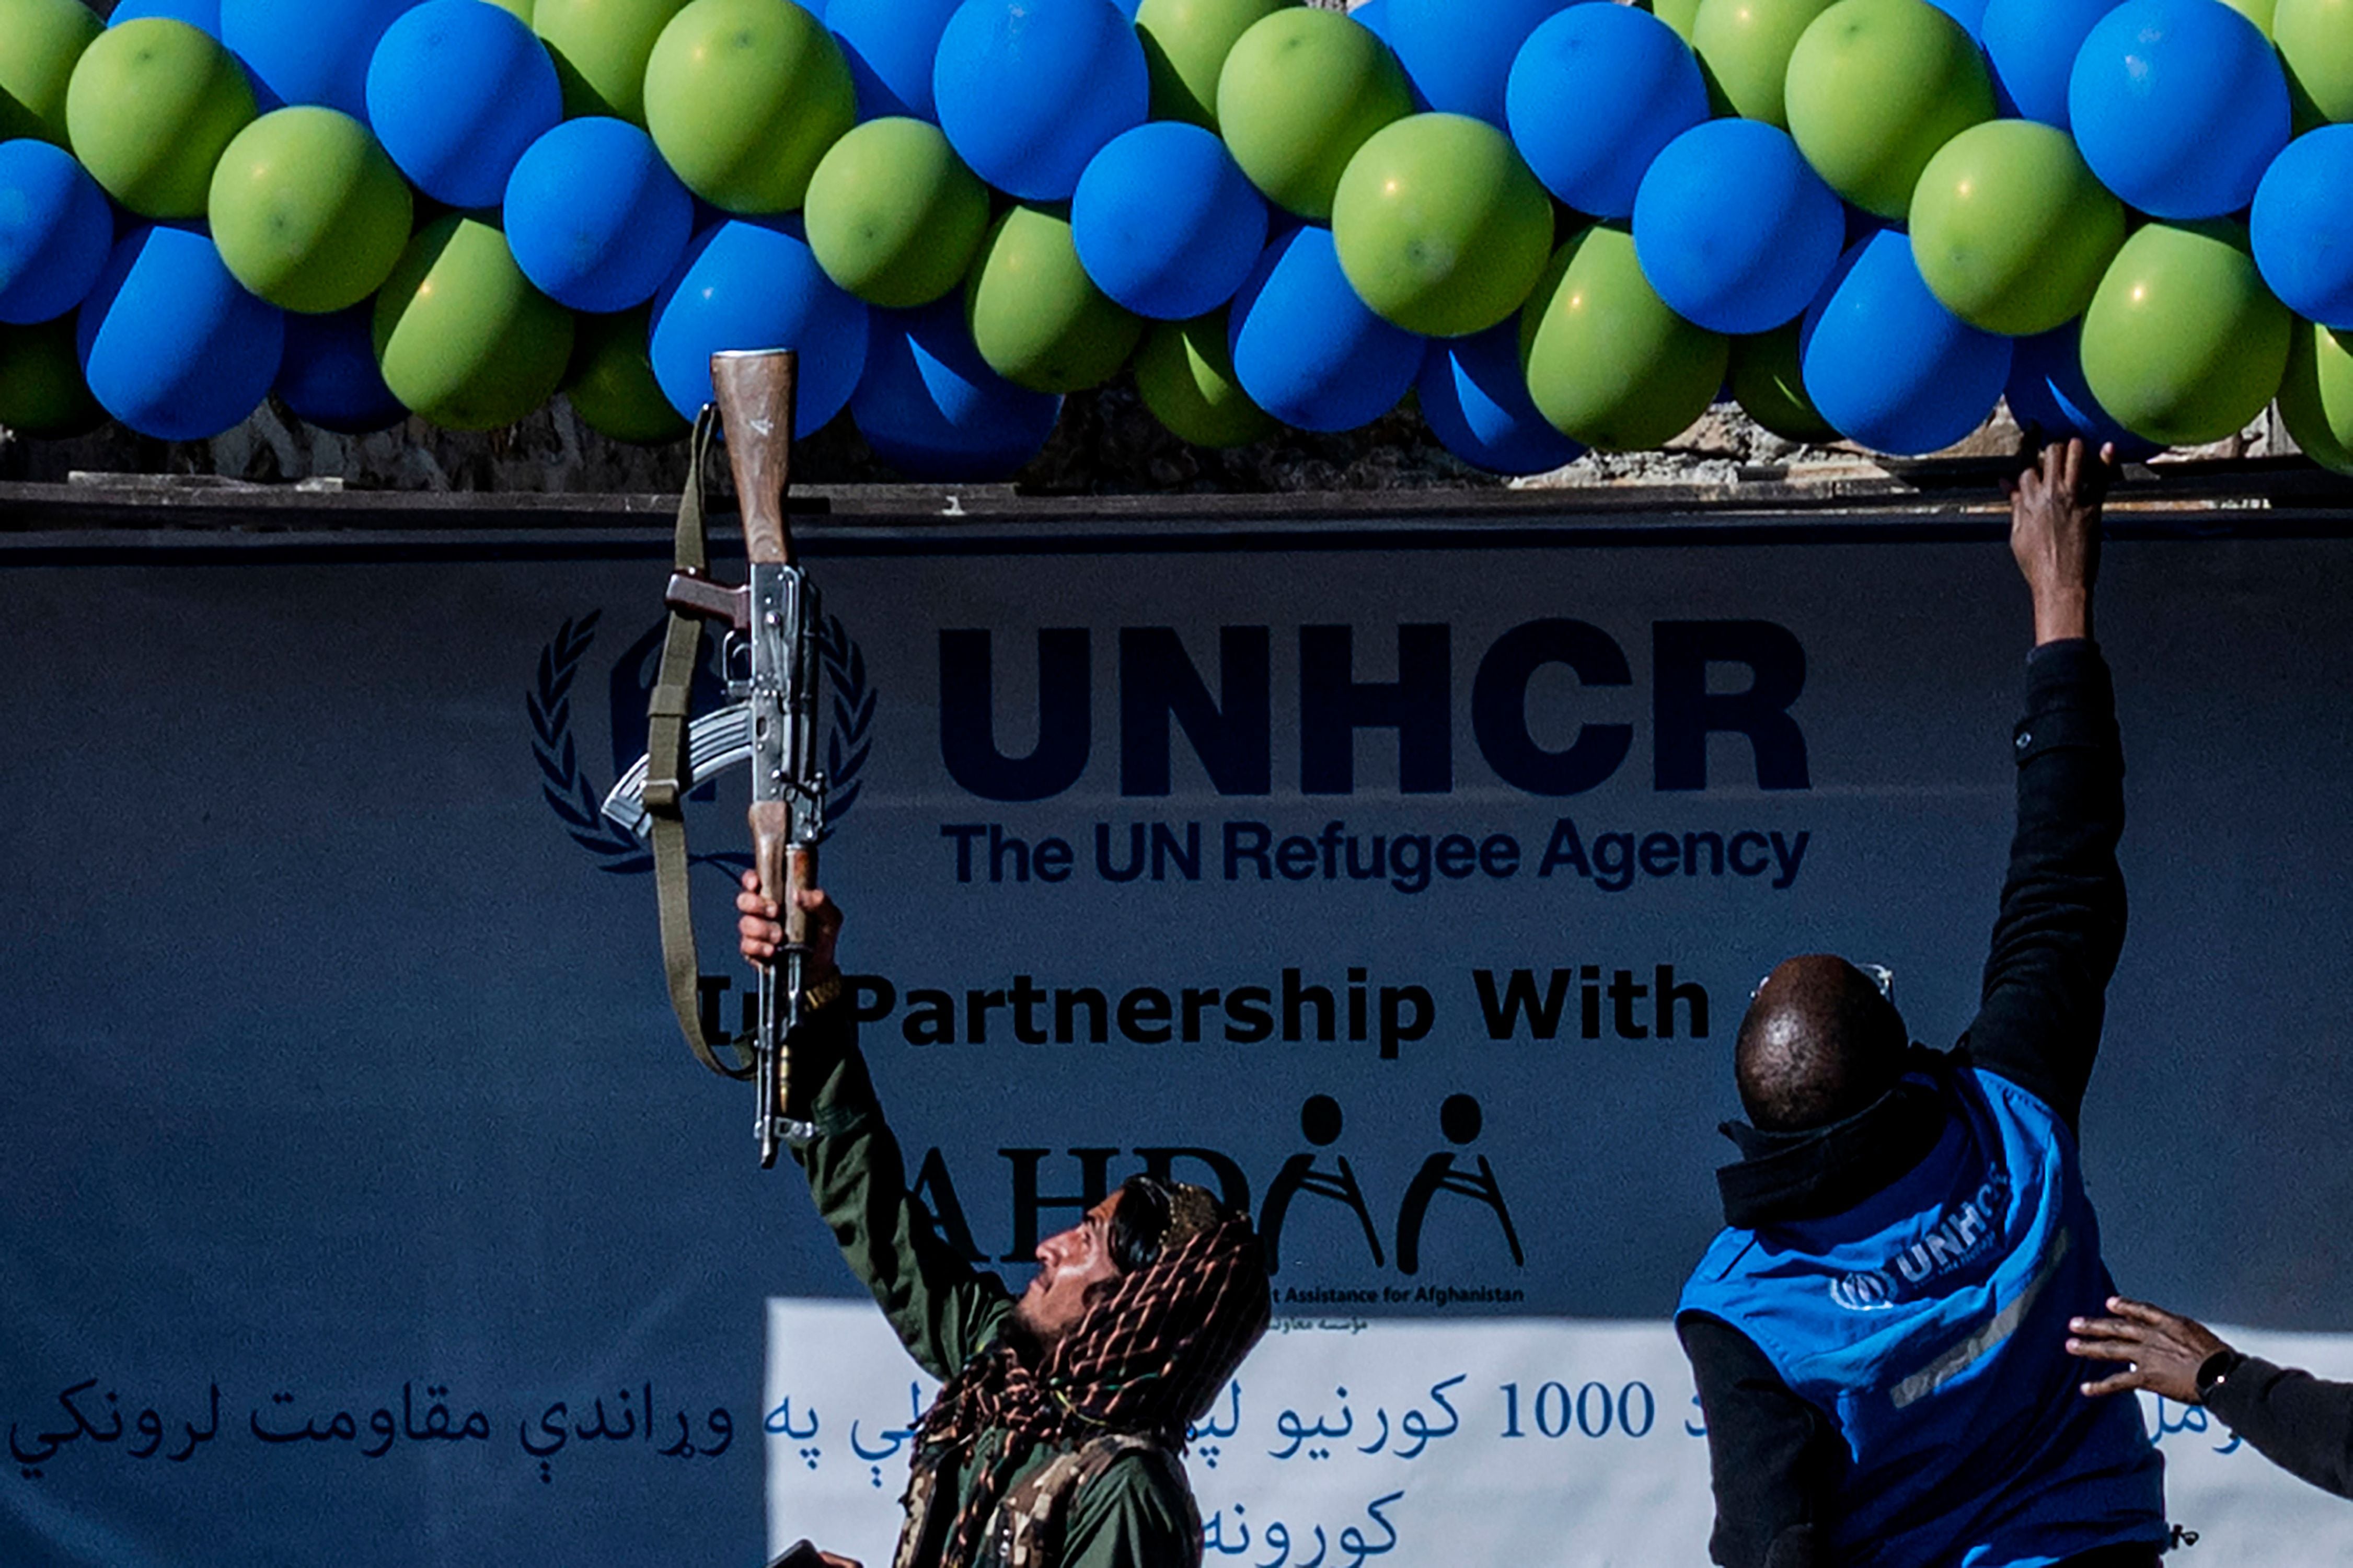 A member of Taliban security adjust balloons with his gun during a handover ceremony of newly built houses constructed by the United Nations refugee agency (UNHCR) in Paktika province